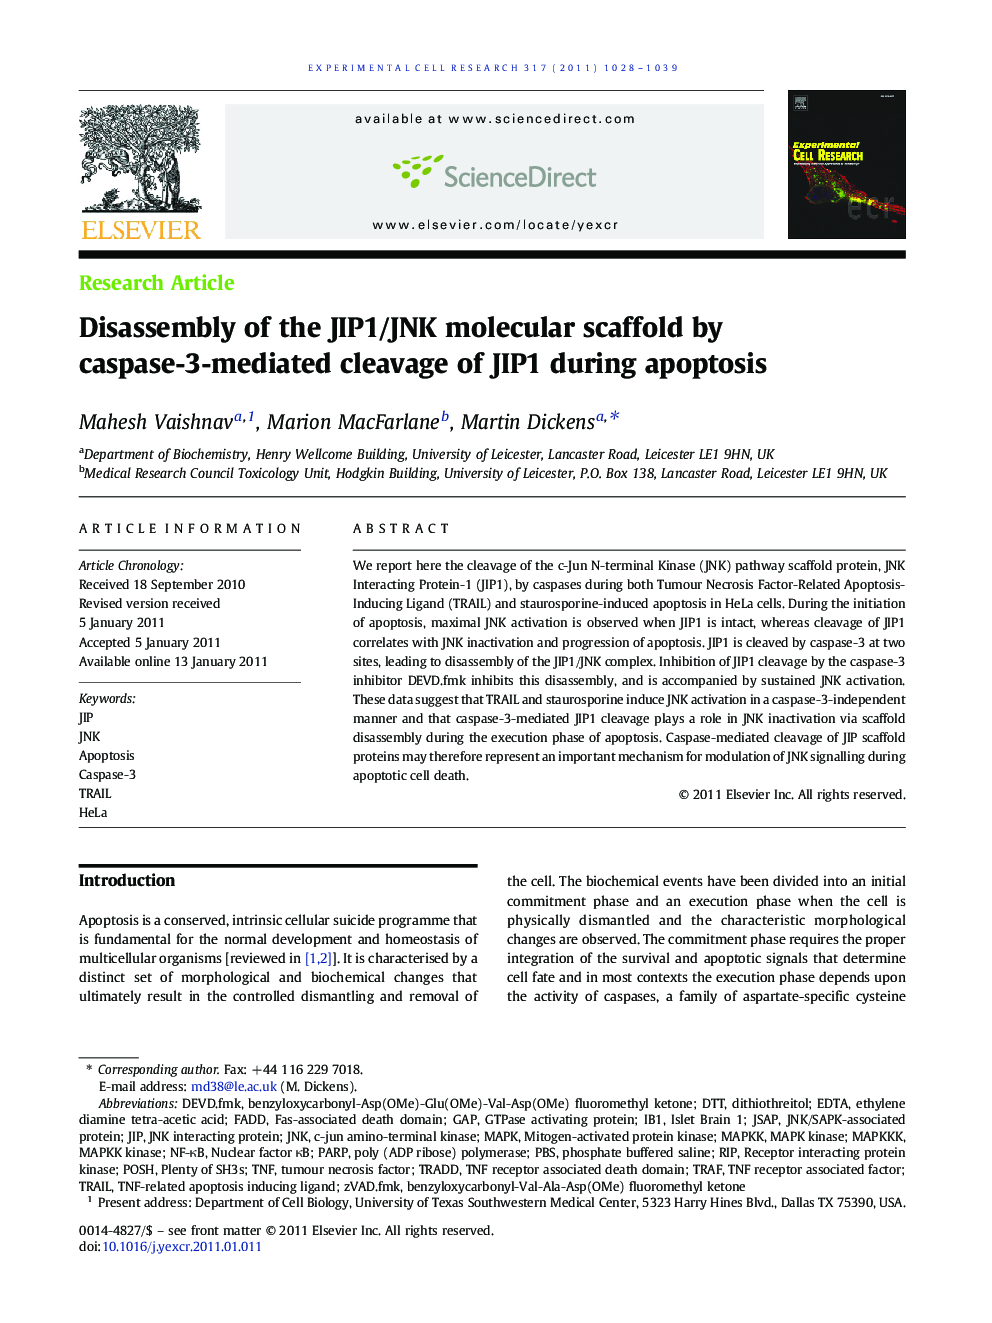 Disassembly of the JIP1/JNK molecular scaffold by caspase-3-mediated cleavage of JIP1 during apoptosis